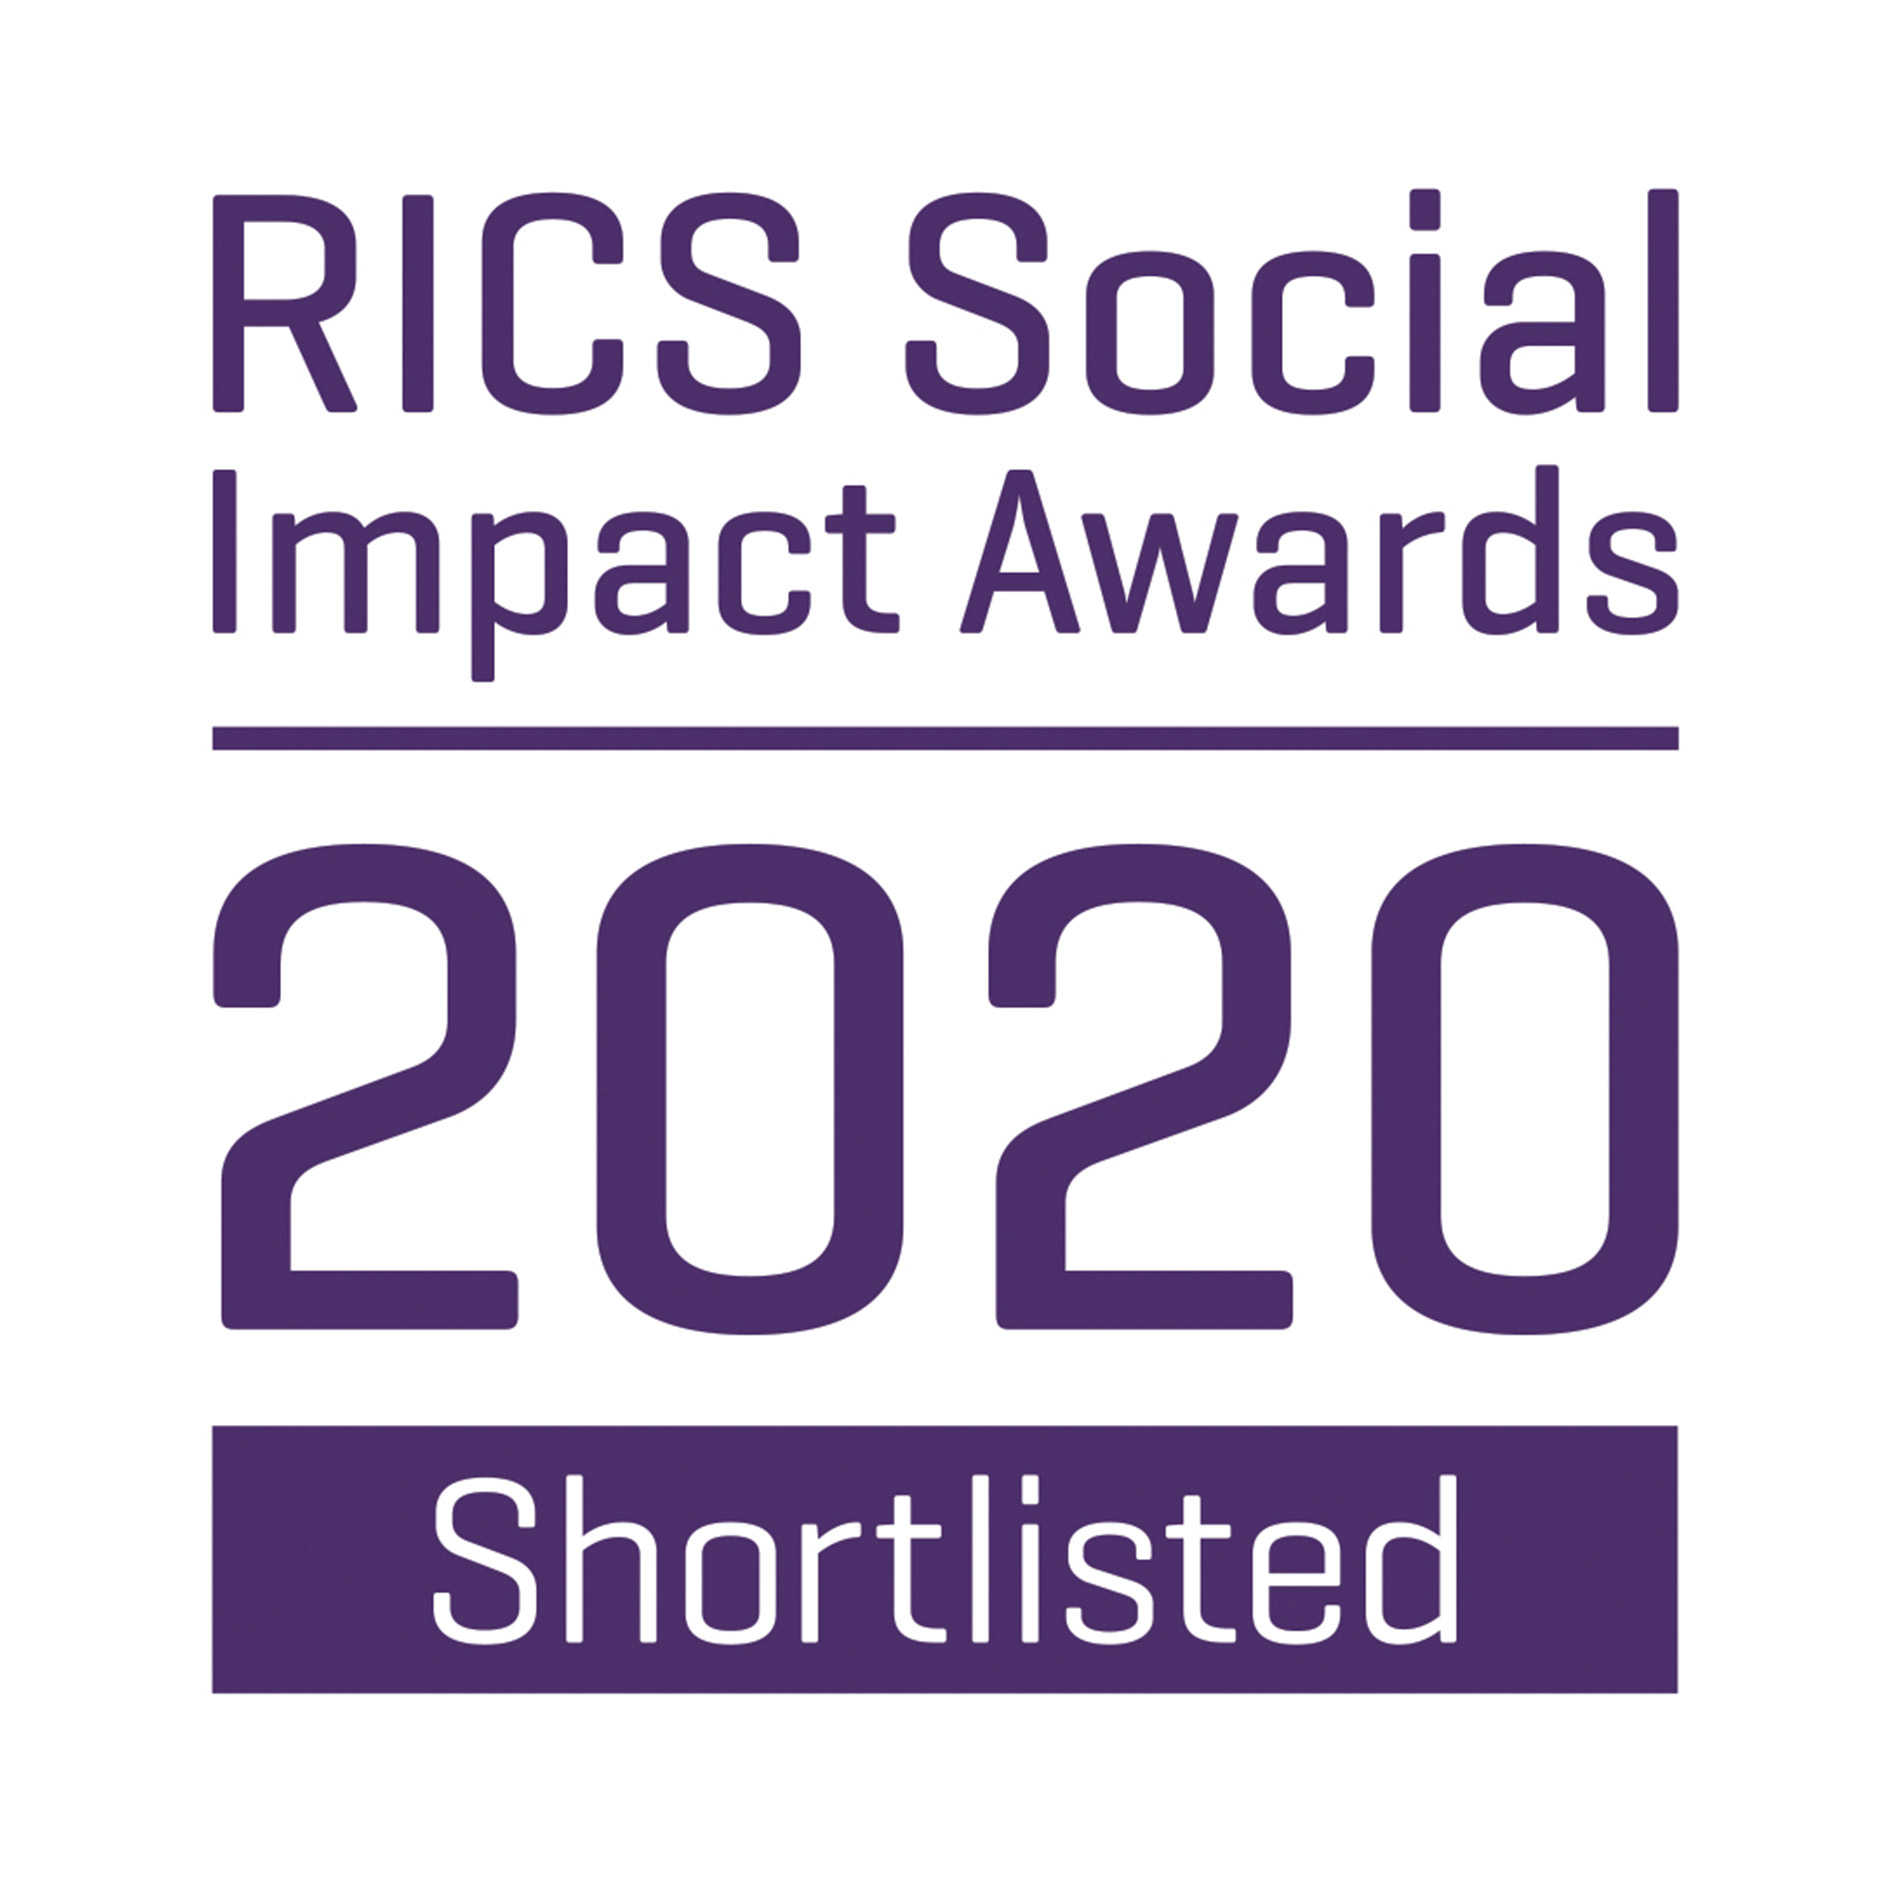 20-03-09-Studio-144-Shortlisted-for-inaugural-RICS-Social-Impact-Awards-2020-in-the-Leisure-category.jpg